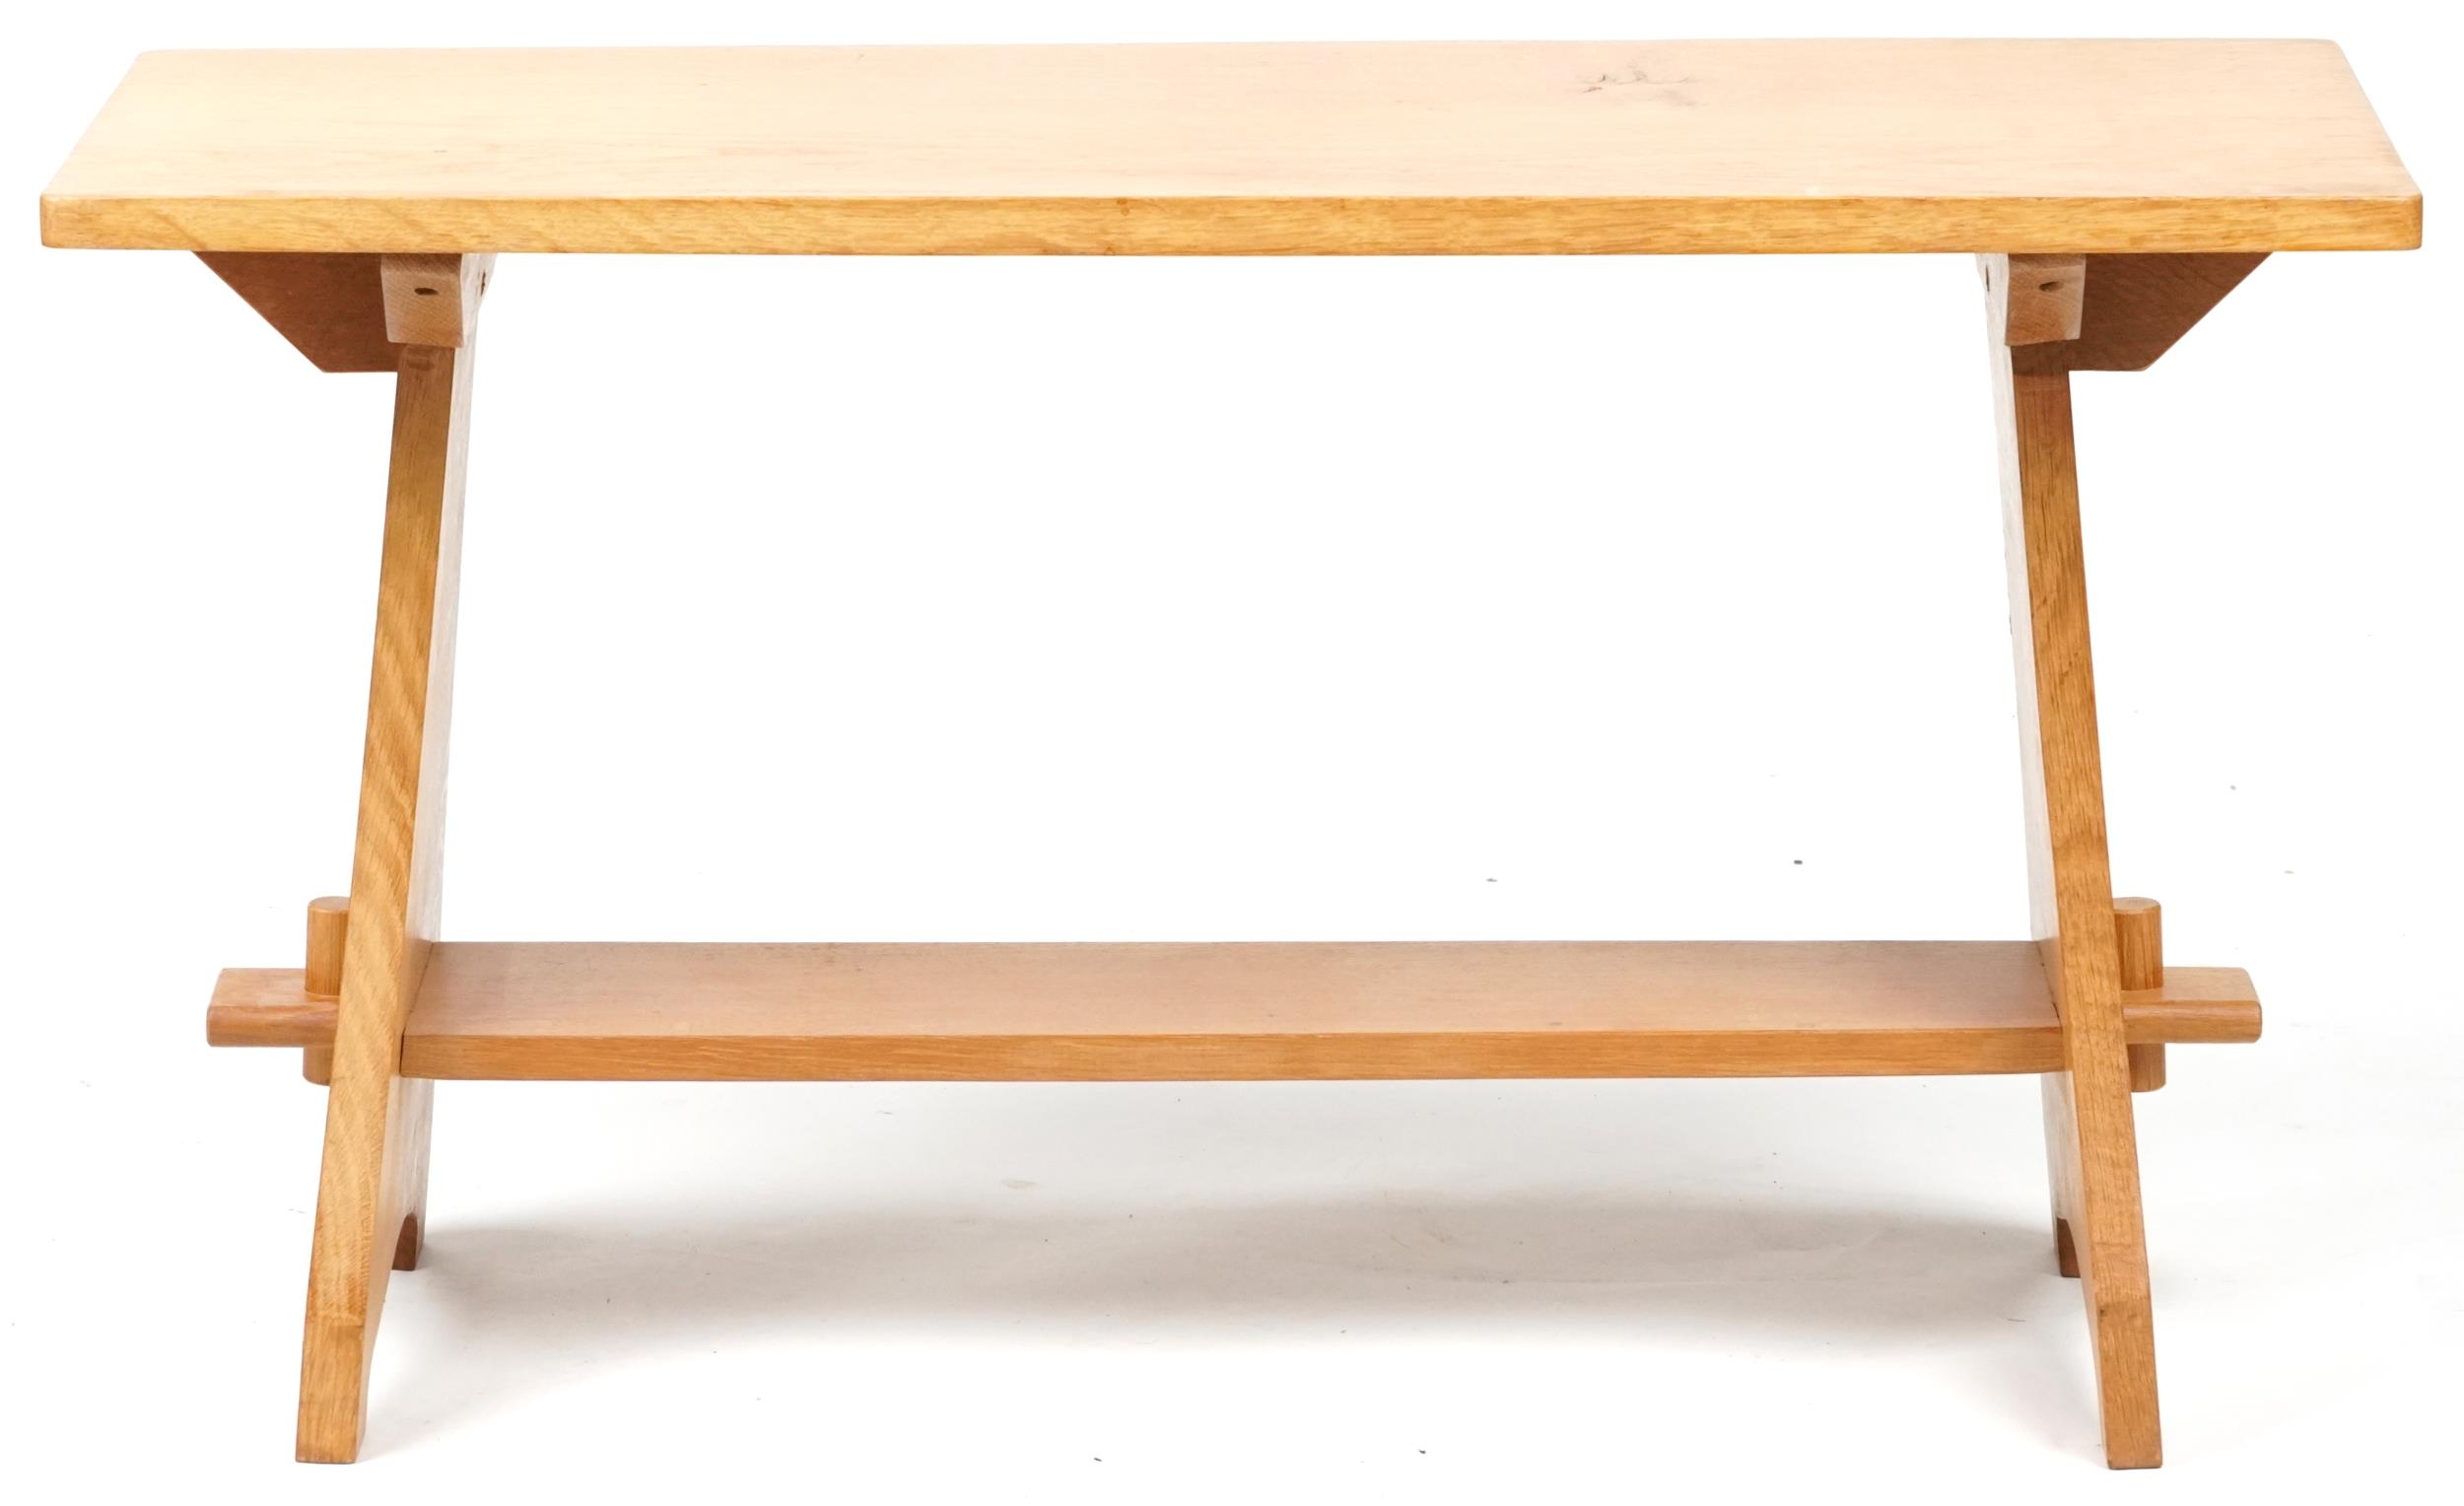 Arts and Crafts style light oak coffee table, 52cm H x 91cm W x 38cm D - Image 2 of 4